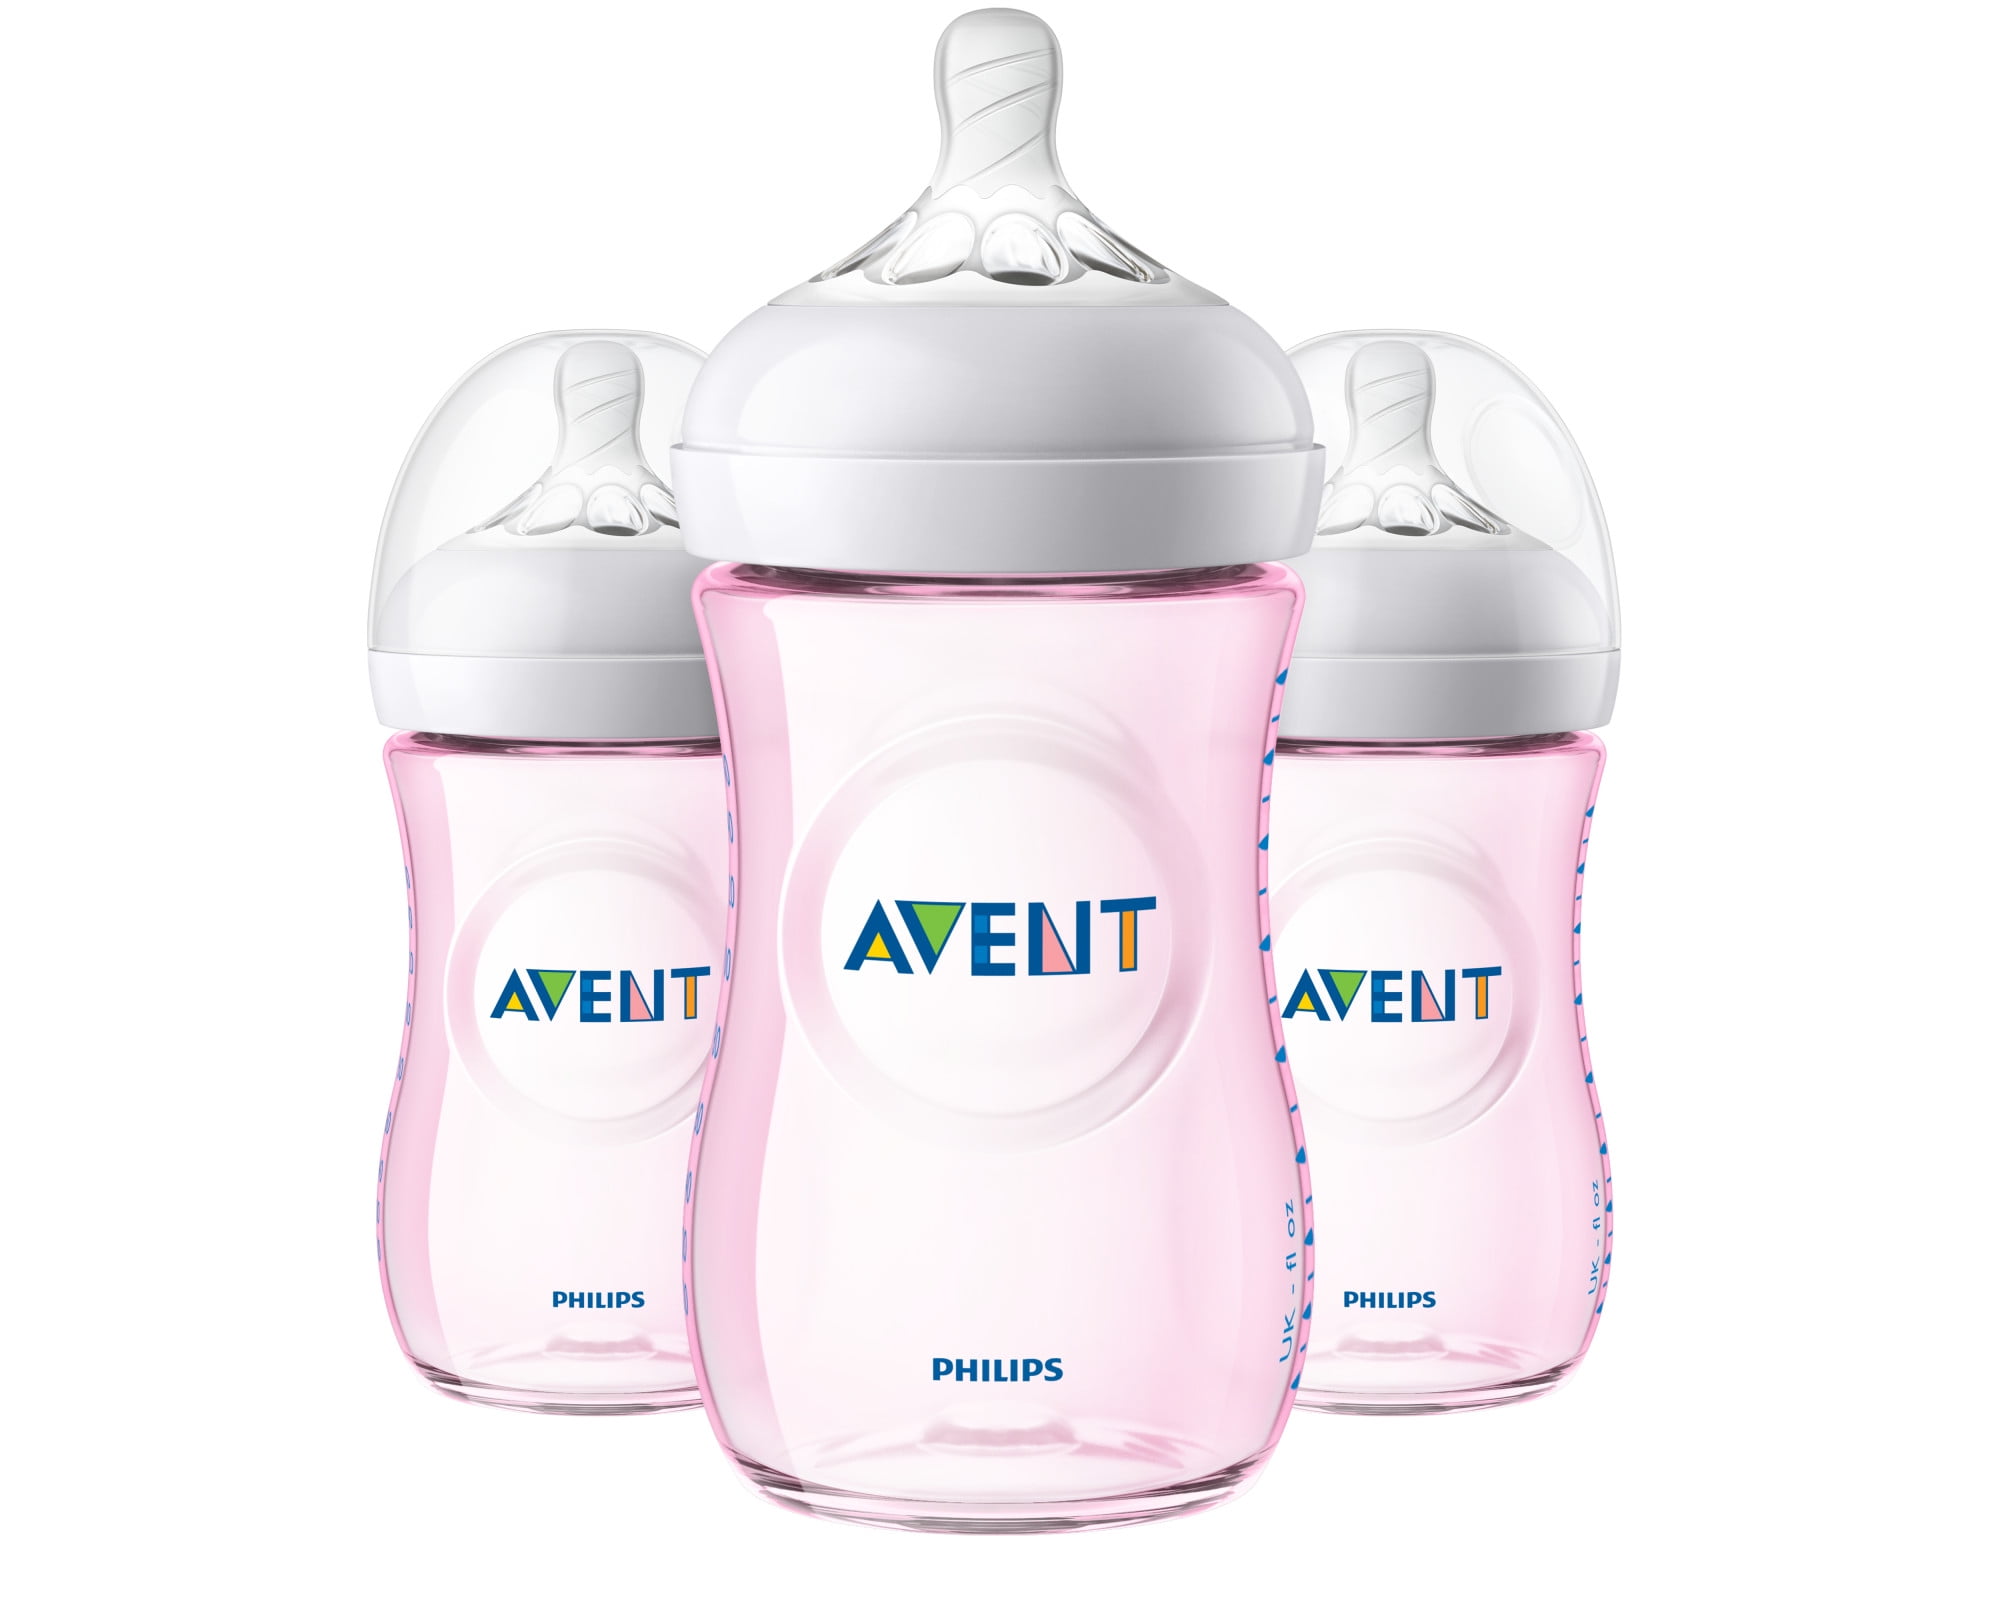 Philips Avent Baby Classic Bottle 260 ml, Pink Lady Bugs, Pack of 2 